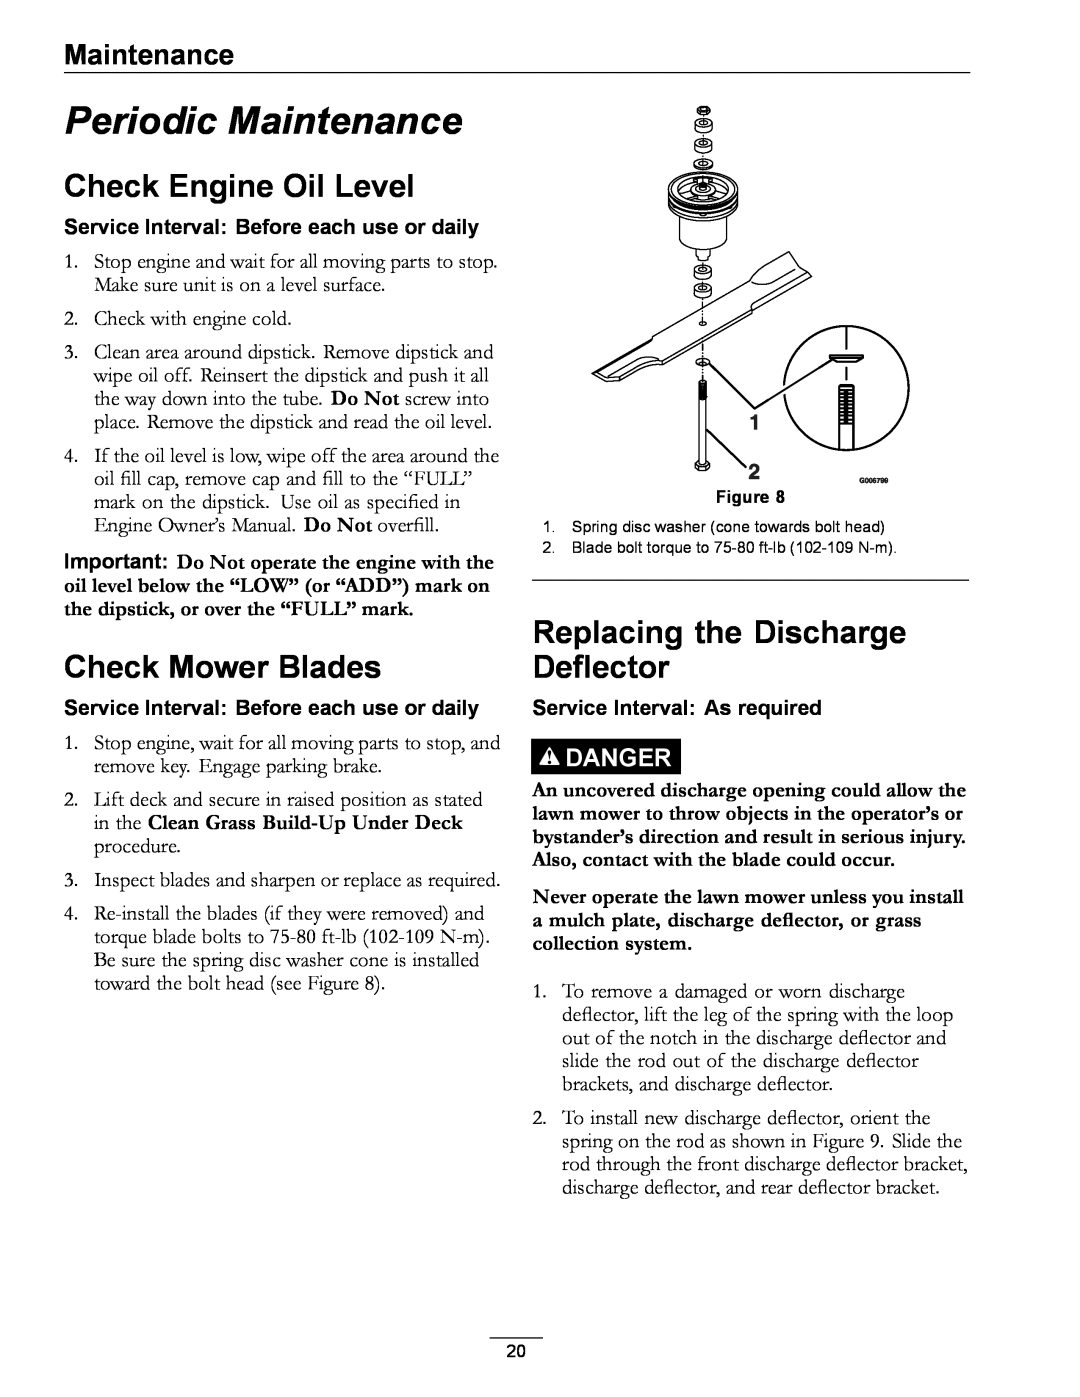 Exmark 850 Periodic Maintenance, Check Engine Oil Level, Check Mower Blades, Replacing the Discharge Deflector, Danger 